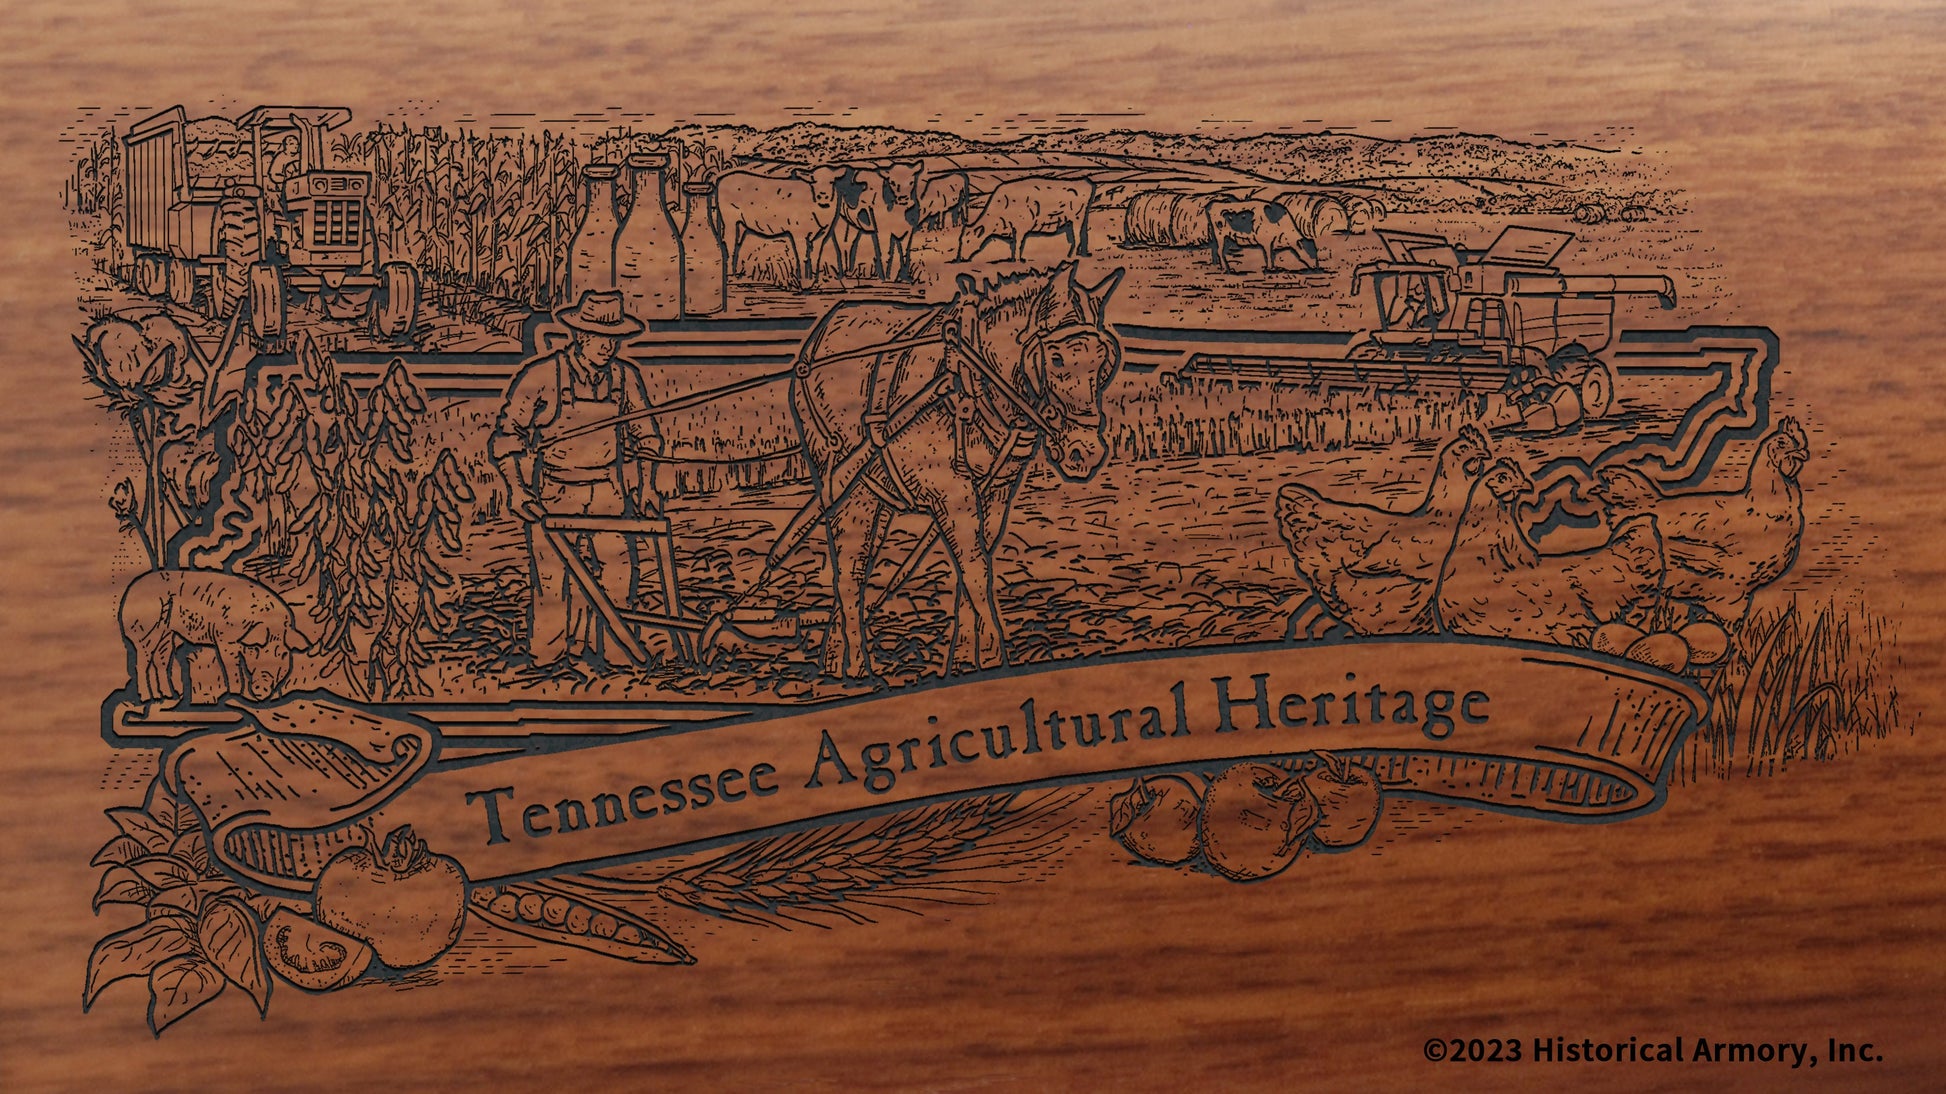 Tennessee Agricultural Heritage Engraved Rifle Buttstock